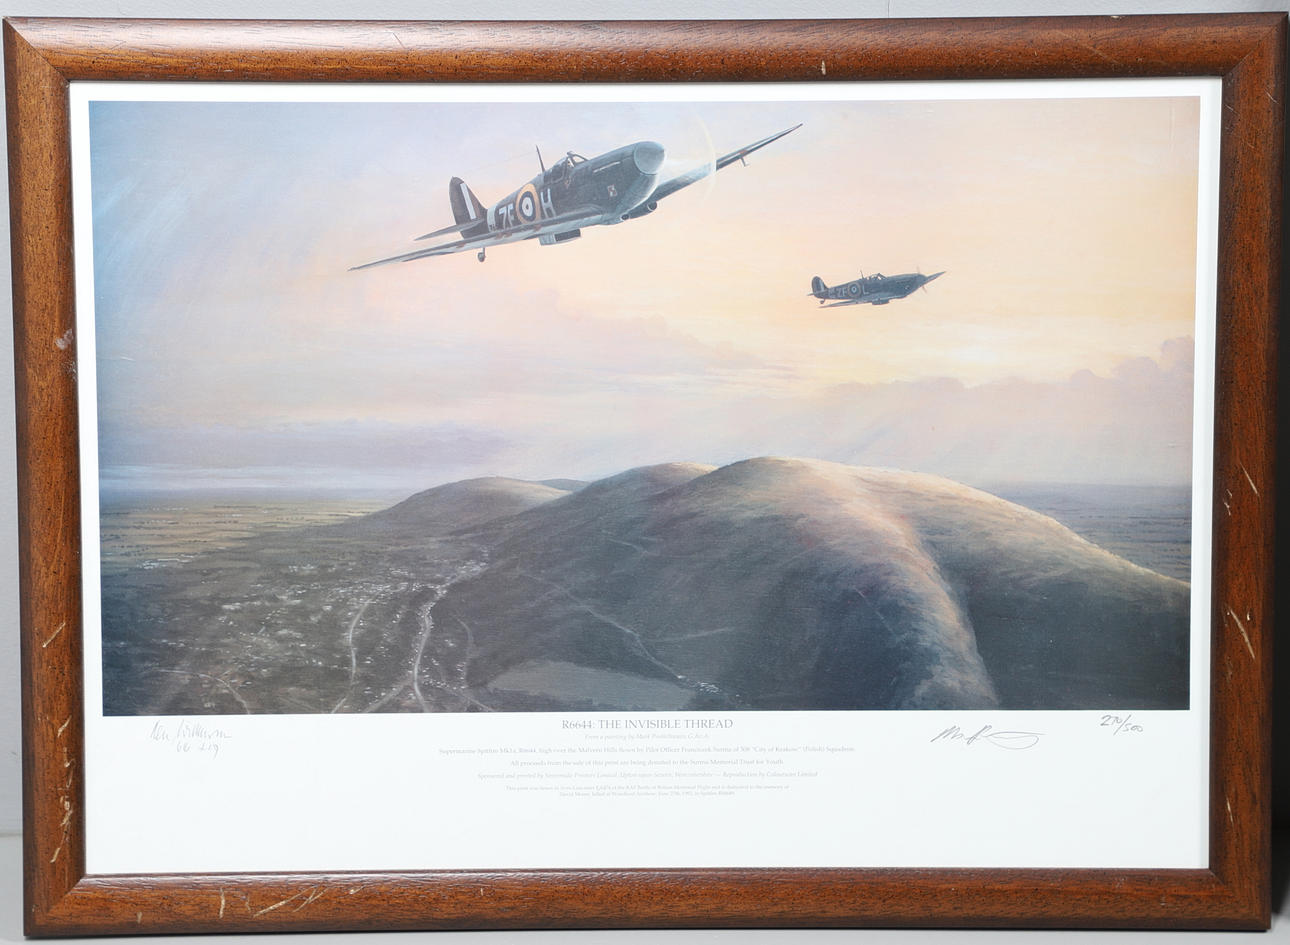 A LARGE COLOUR PRINT OF A SPITFIRE BY BARRIE CLARK, AND A SIMILAR LIMITED EDITION PRINT. - Image 2 of 6